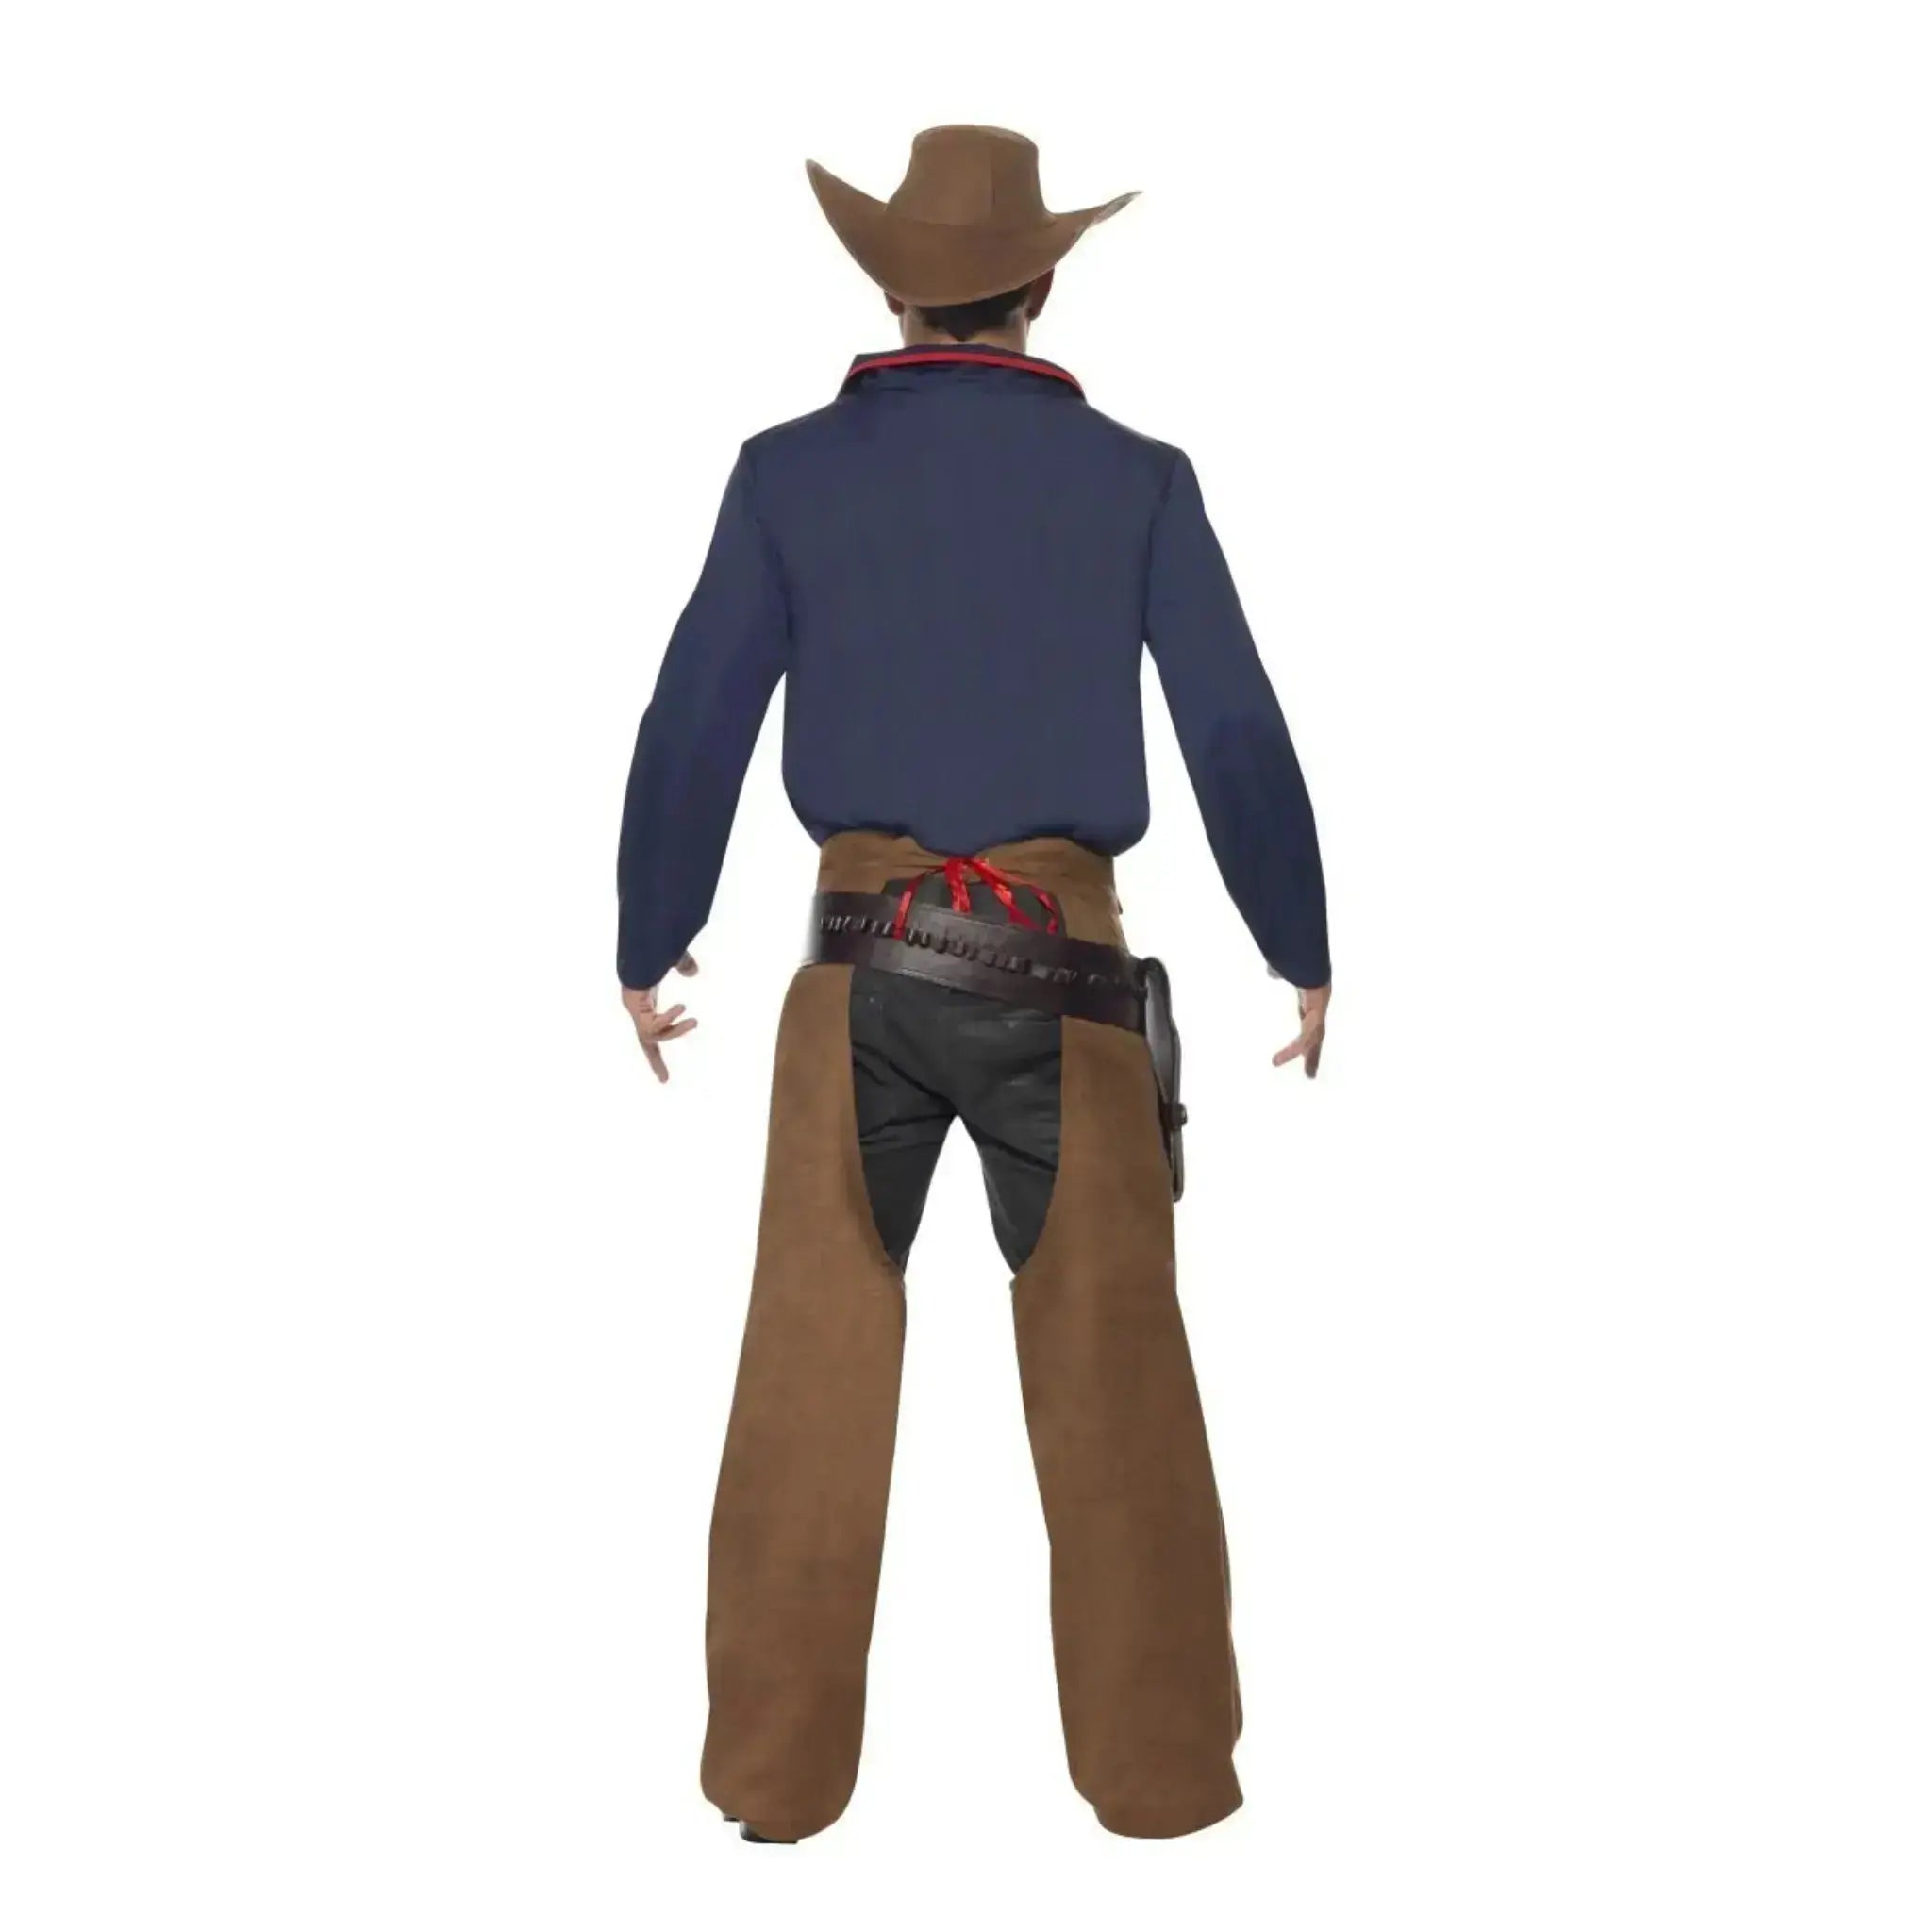 Rodeo Cowboy Costume | The Party Hut